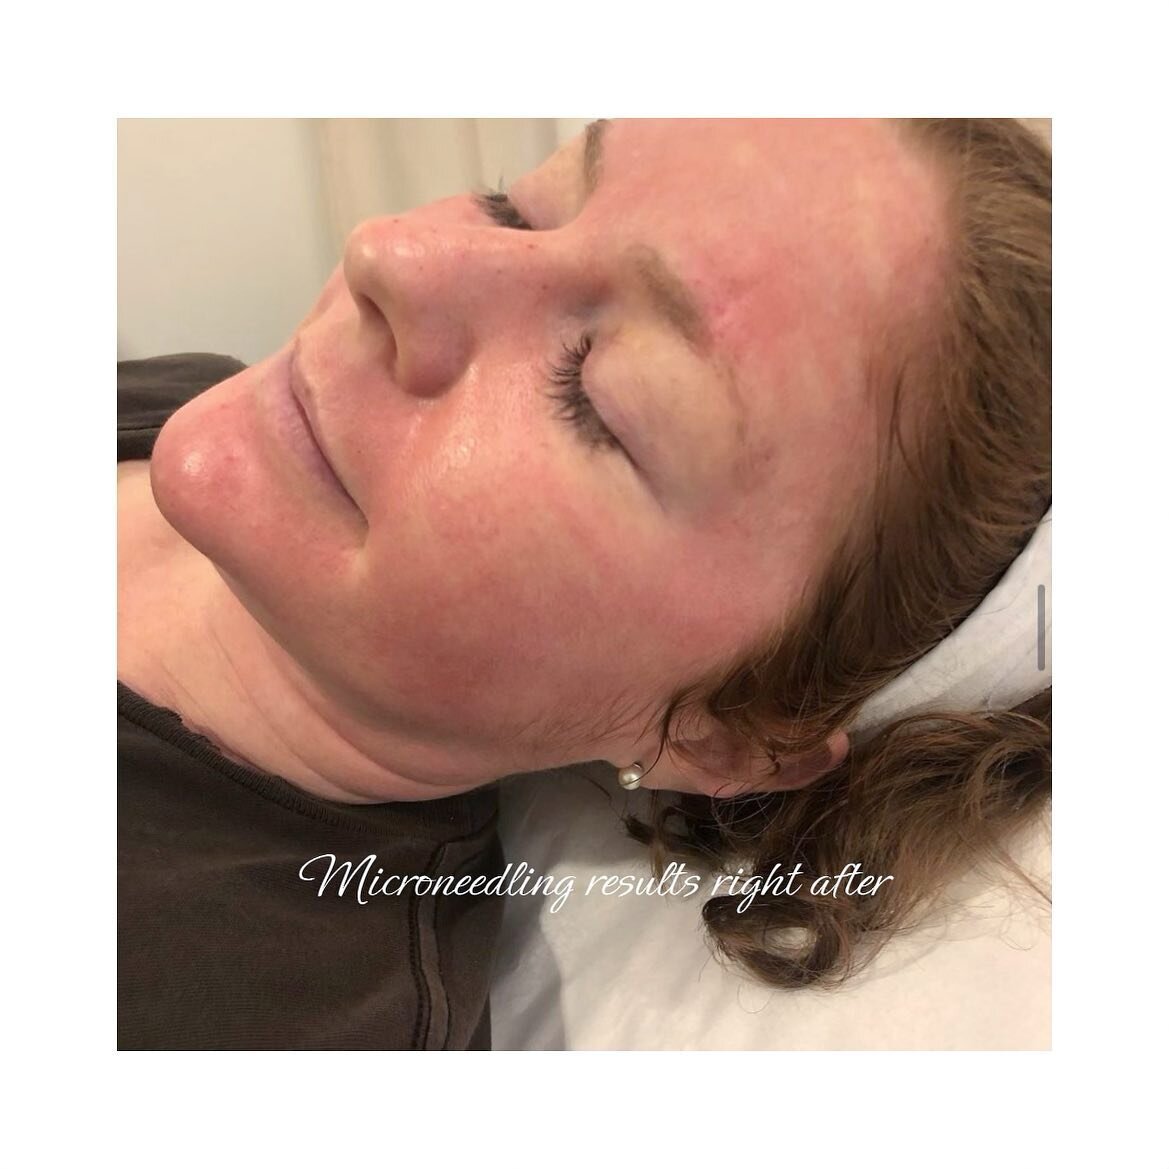 Right after #microneedling. Results set in 2-3 days after treatment. Inquire about our standalone microneedling or with a #PRP combination. #skincare